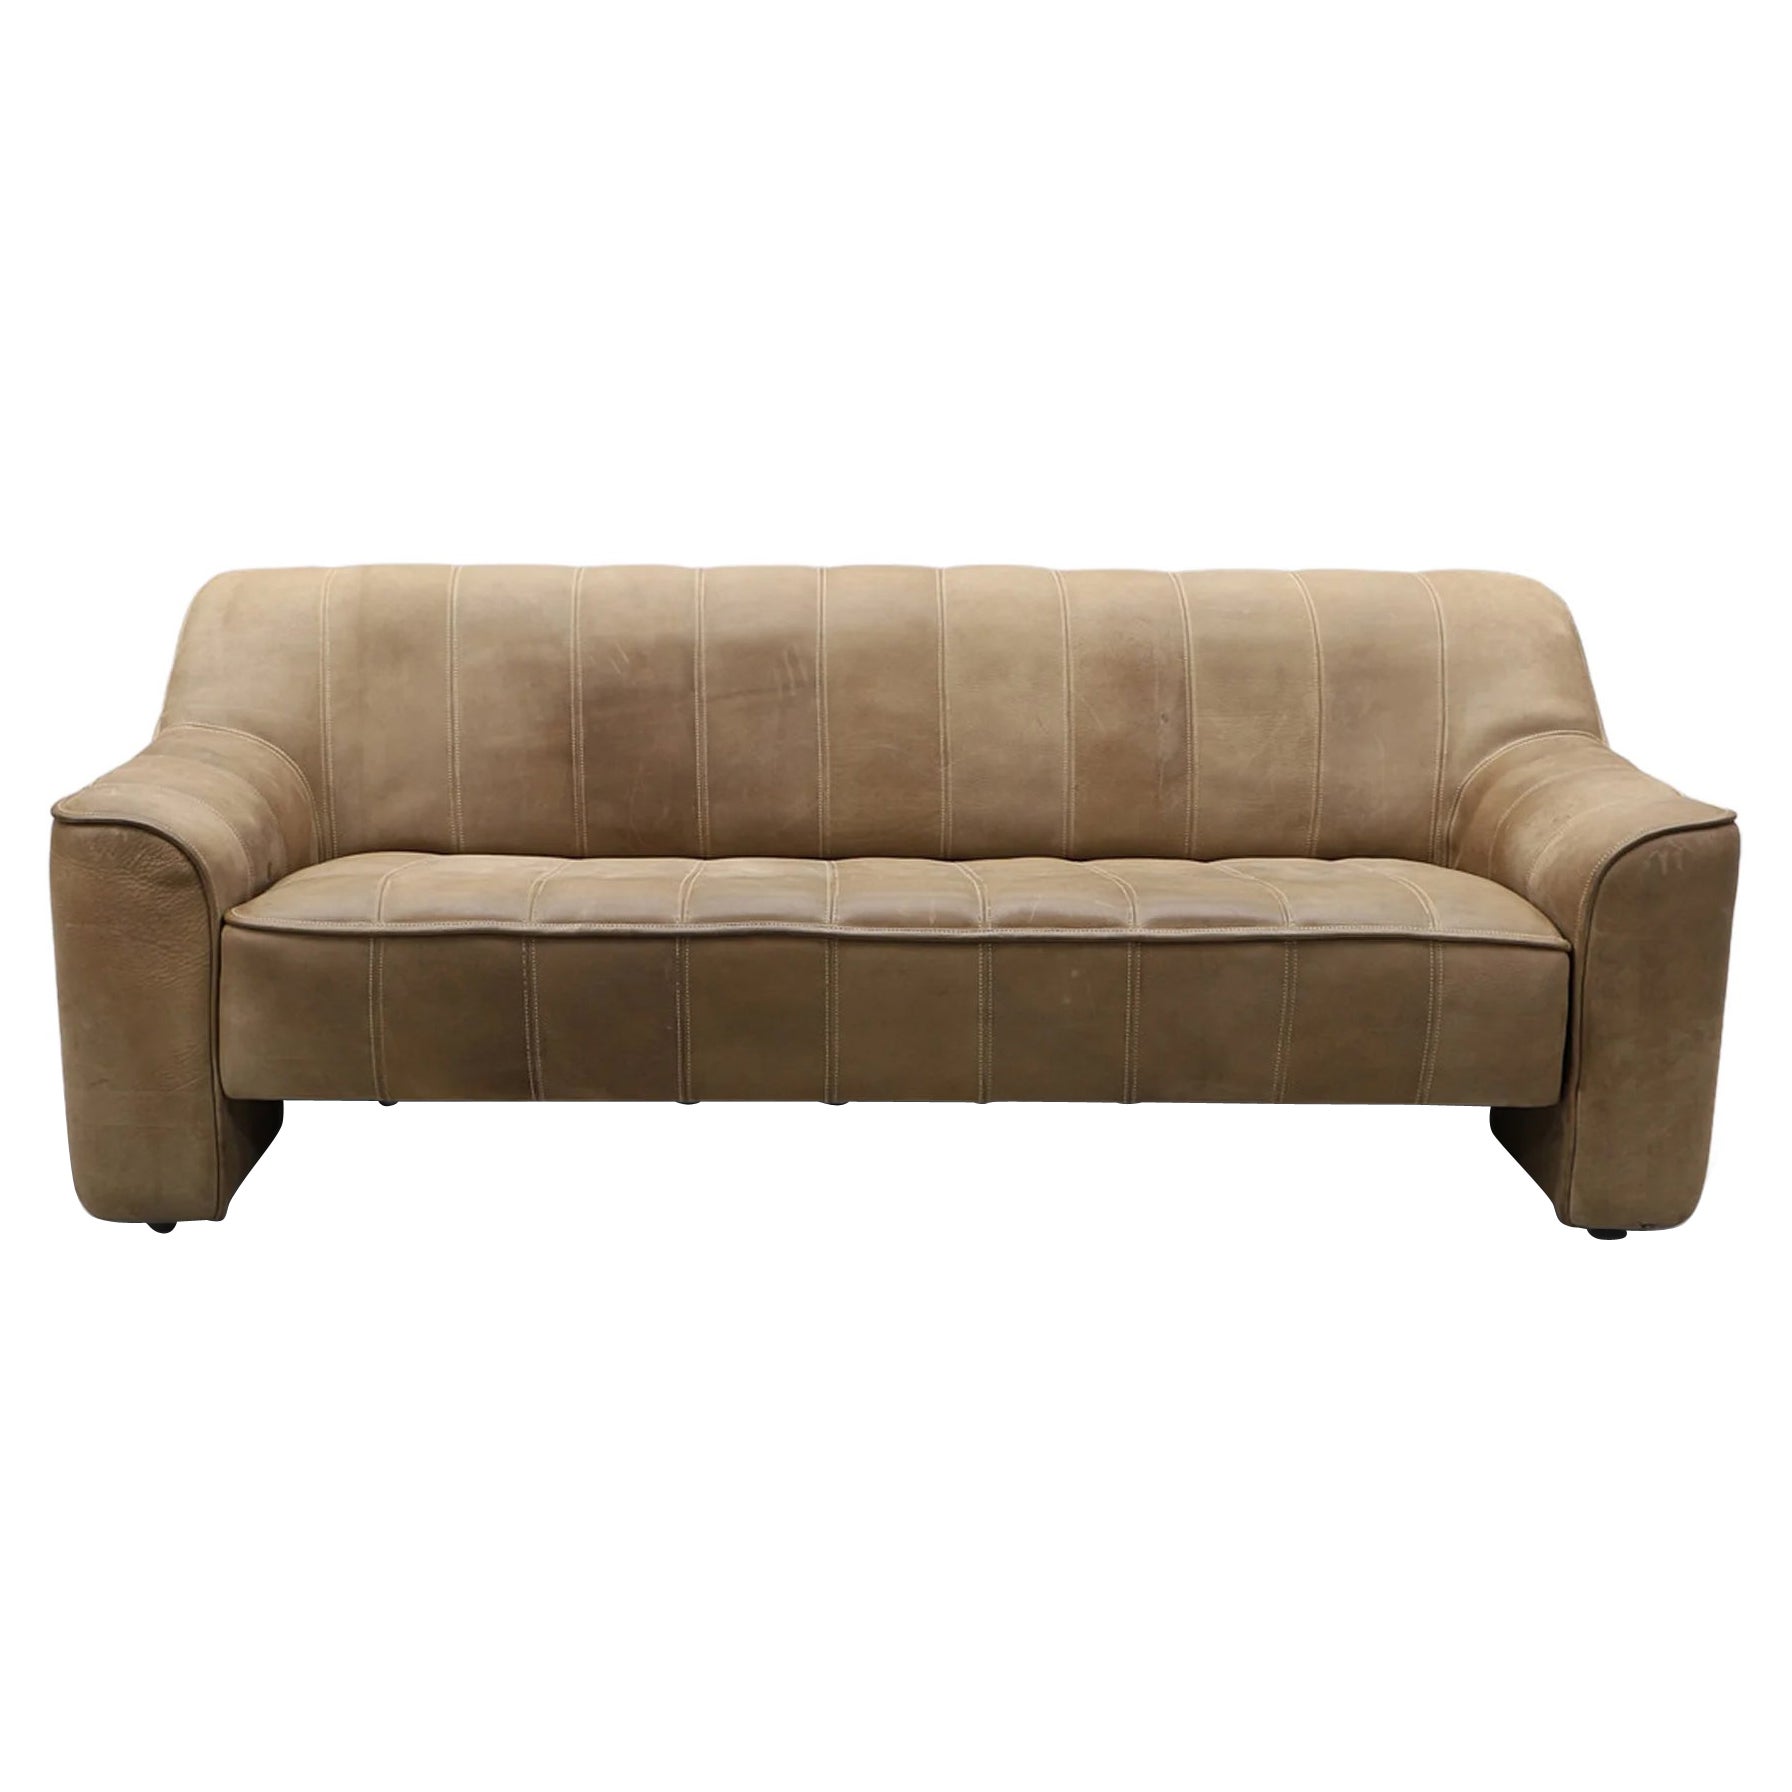 De sede ds 44 three seat extendable sofa in buffalo leather For Sale